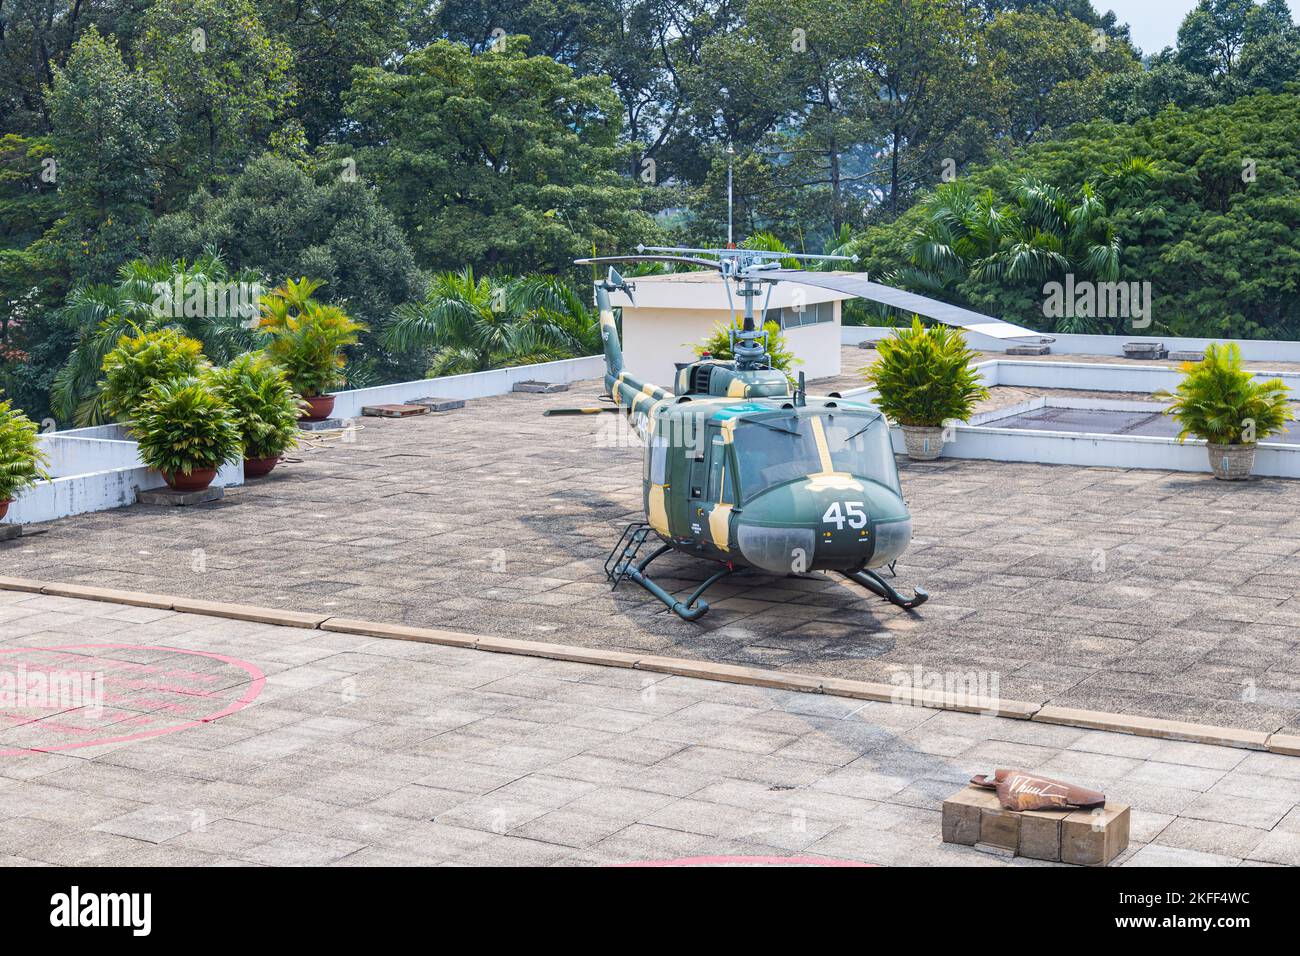 Ho Chi Minh City, Vietnam - November 07, 2022: Helicopter on the roof of the independence palace or reunification palace in Saigon. Built on the site Stock Photo